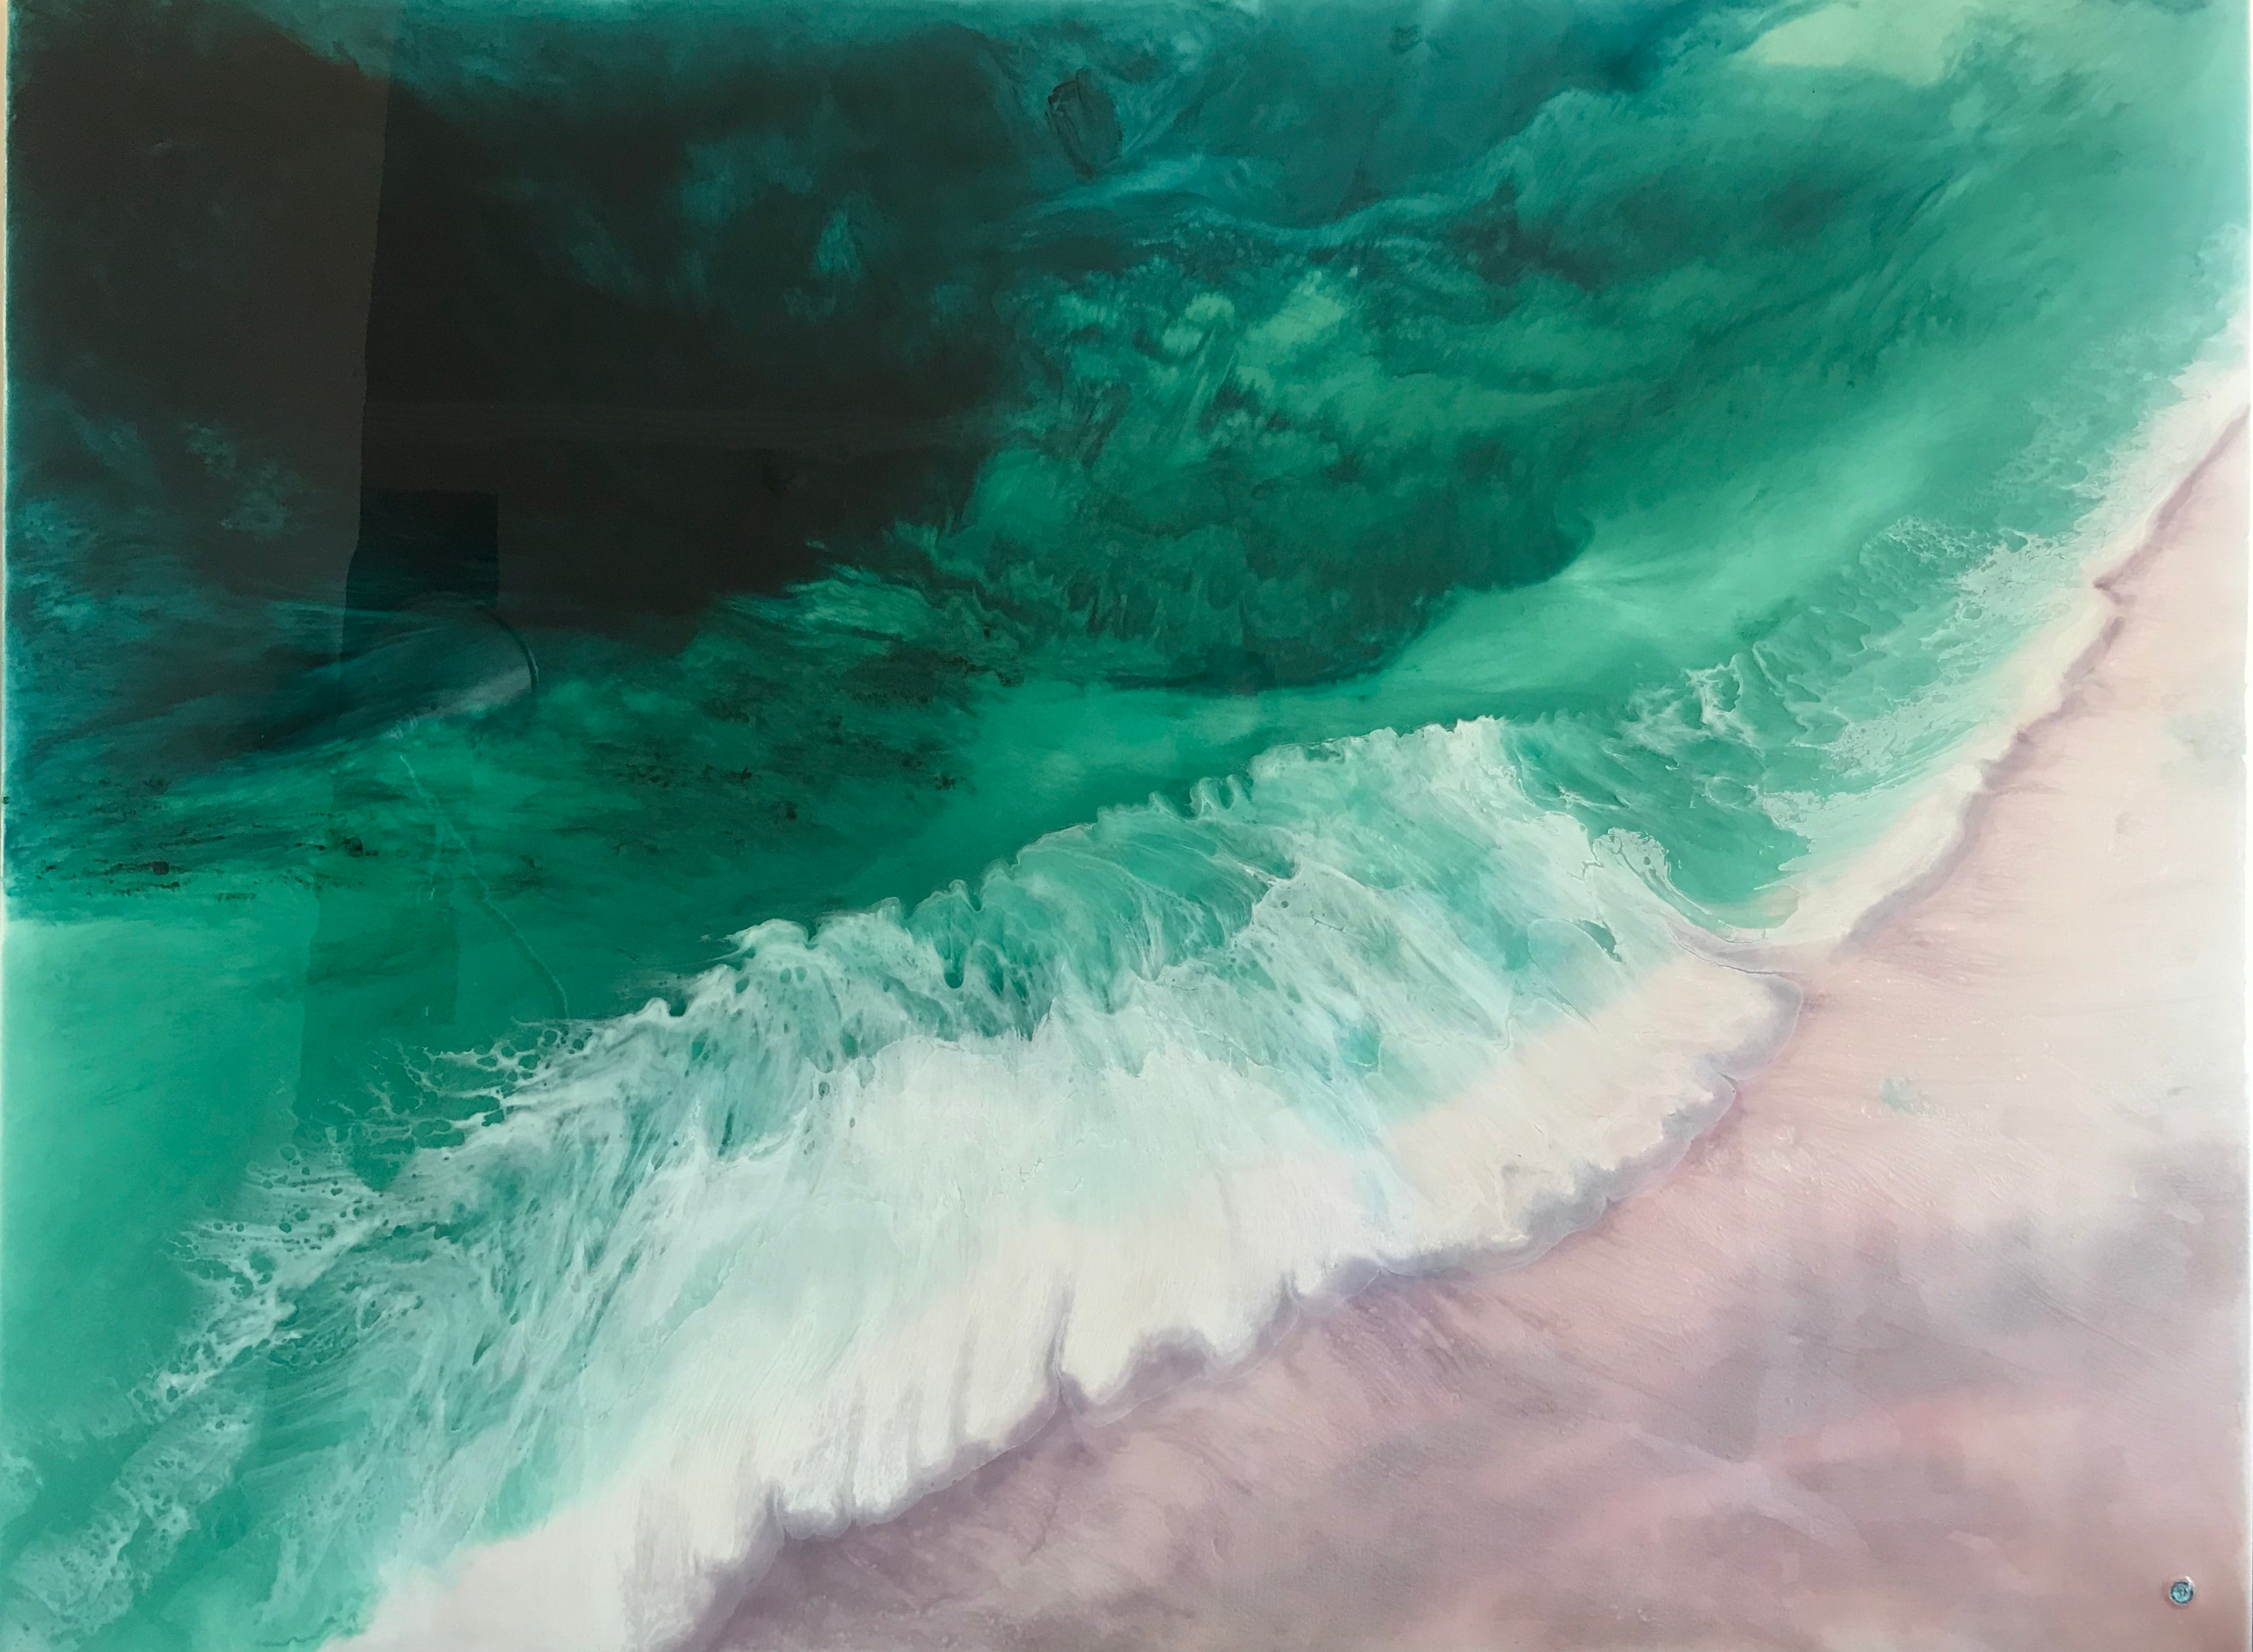 Teal Abstract Artwork. Ocean Blue. Bronte Undercurrent. Antuanelle 9 Undercurrent. Green and Pink Abstract. Original 90x120 cm